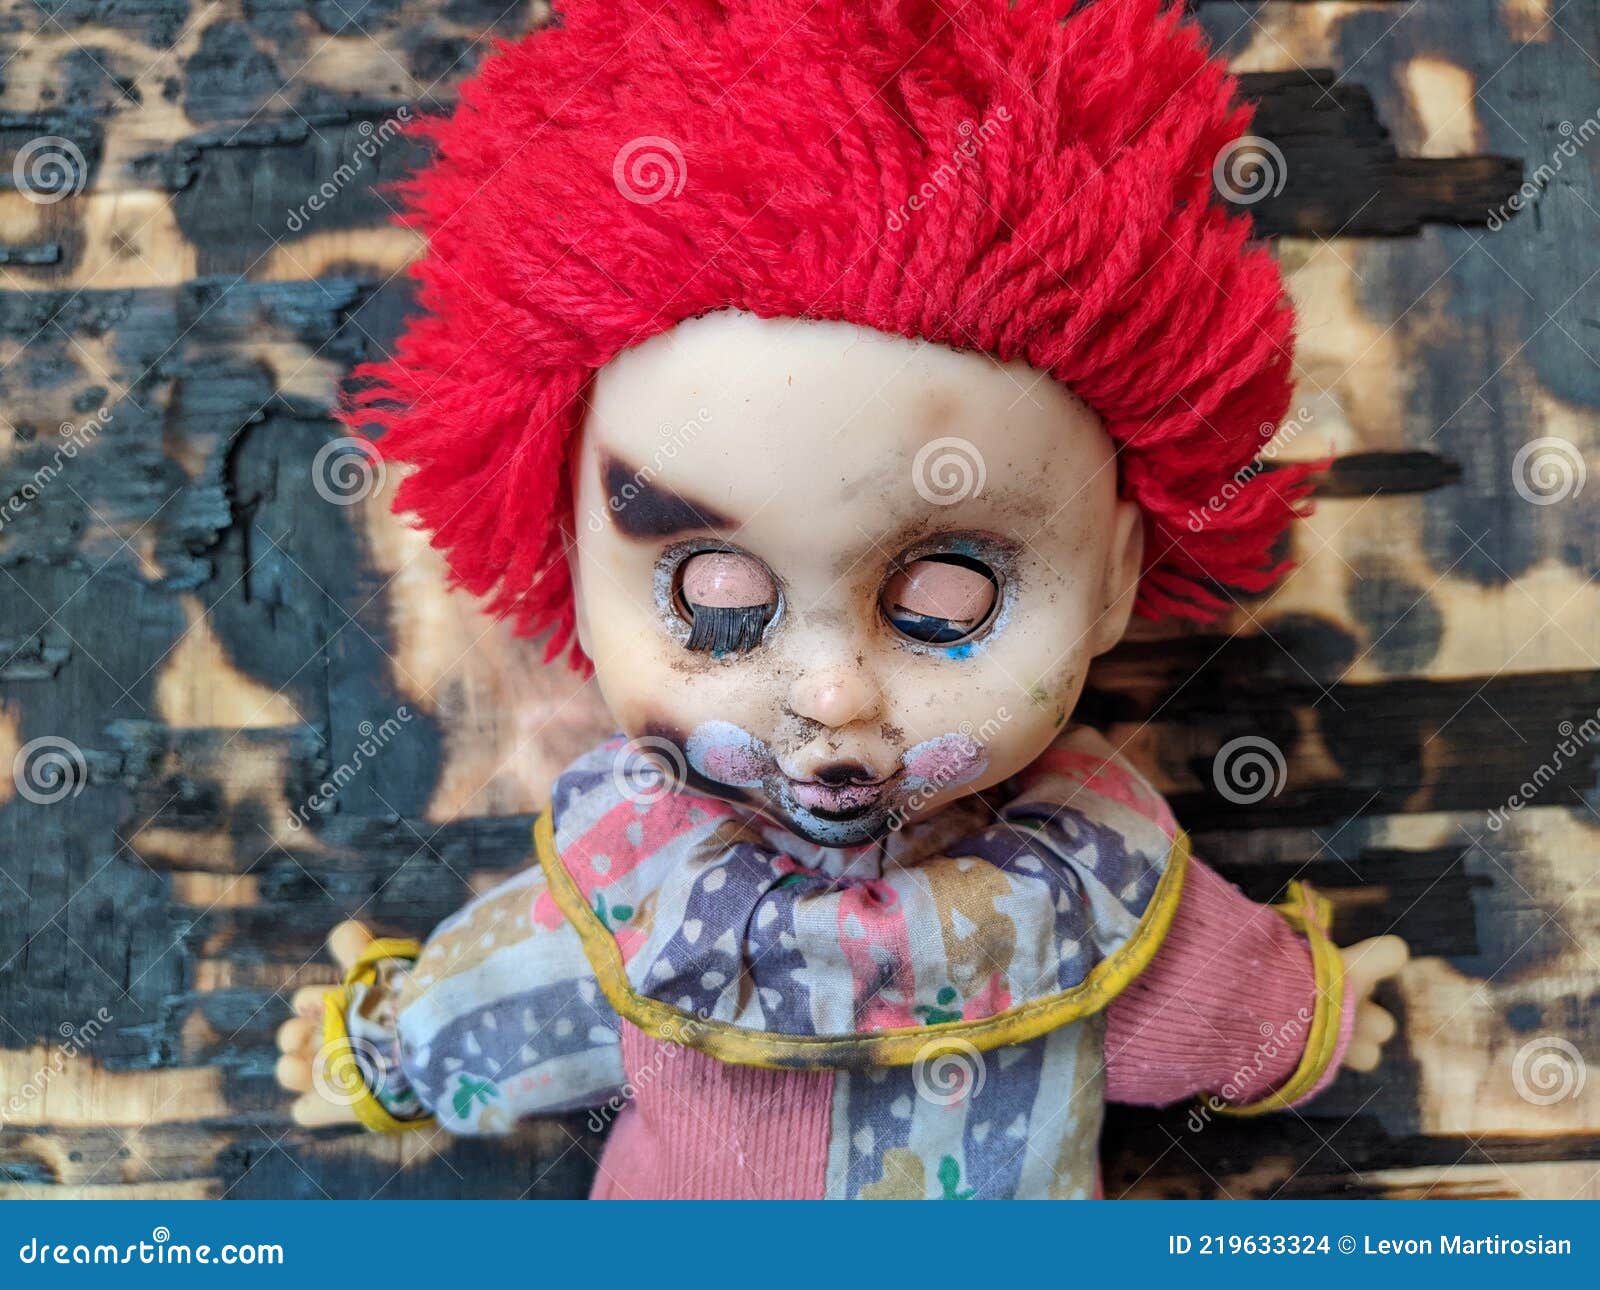 Scary creepy old doll stock photo. Image of staring - 184191750